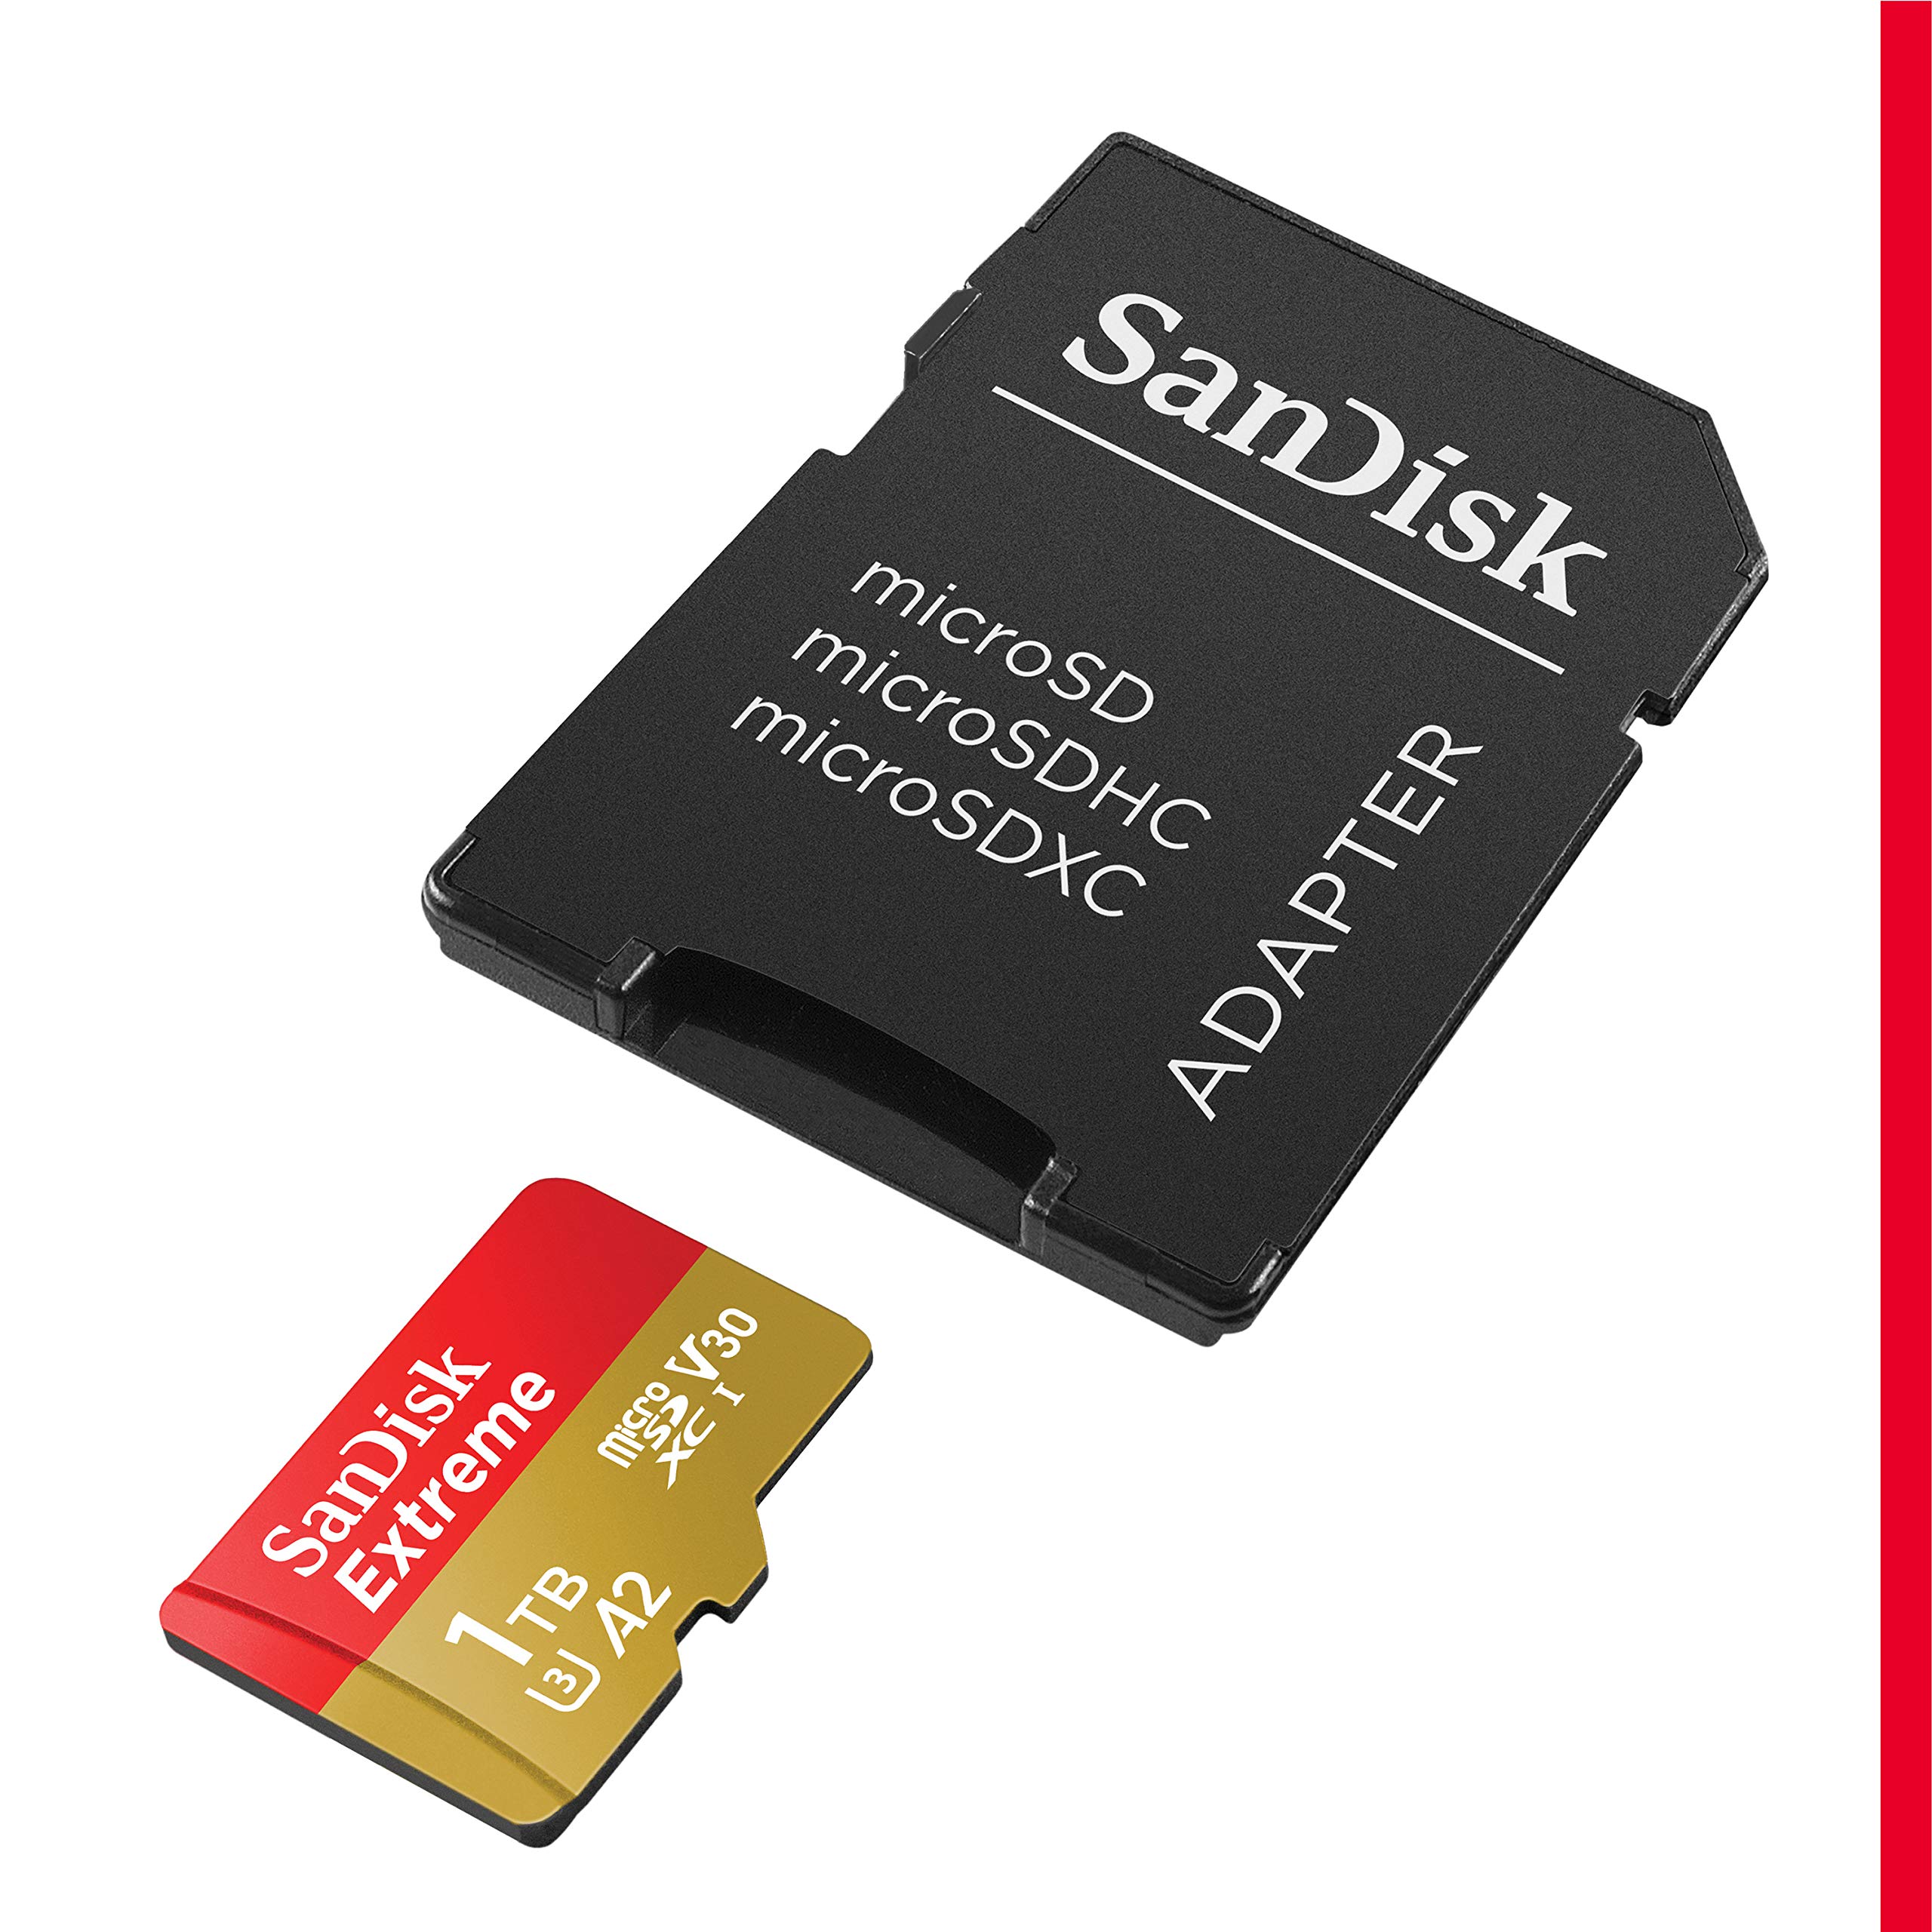 SanDisk 1TB Extreme microSDXC UHS-I Memory Card with Adapter - Up to 160MB/s, C10, U3, V30, 4K, A2, Micro SD - SDSQXA1-1T00-GN6MA